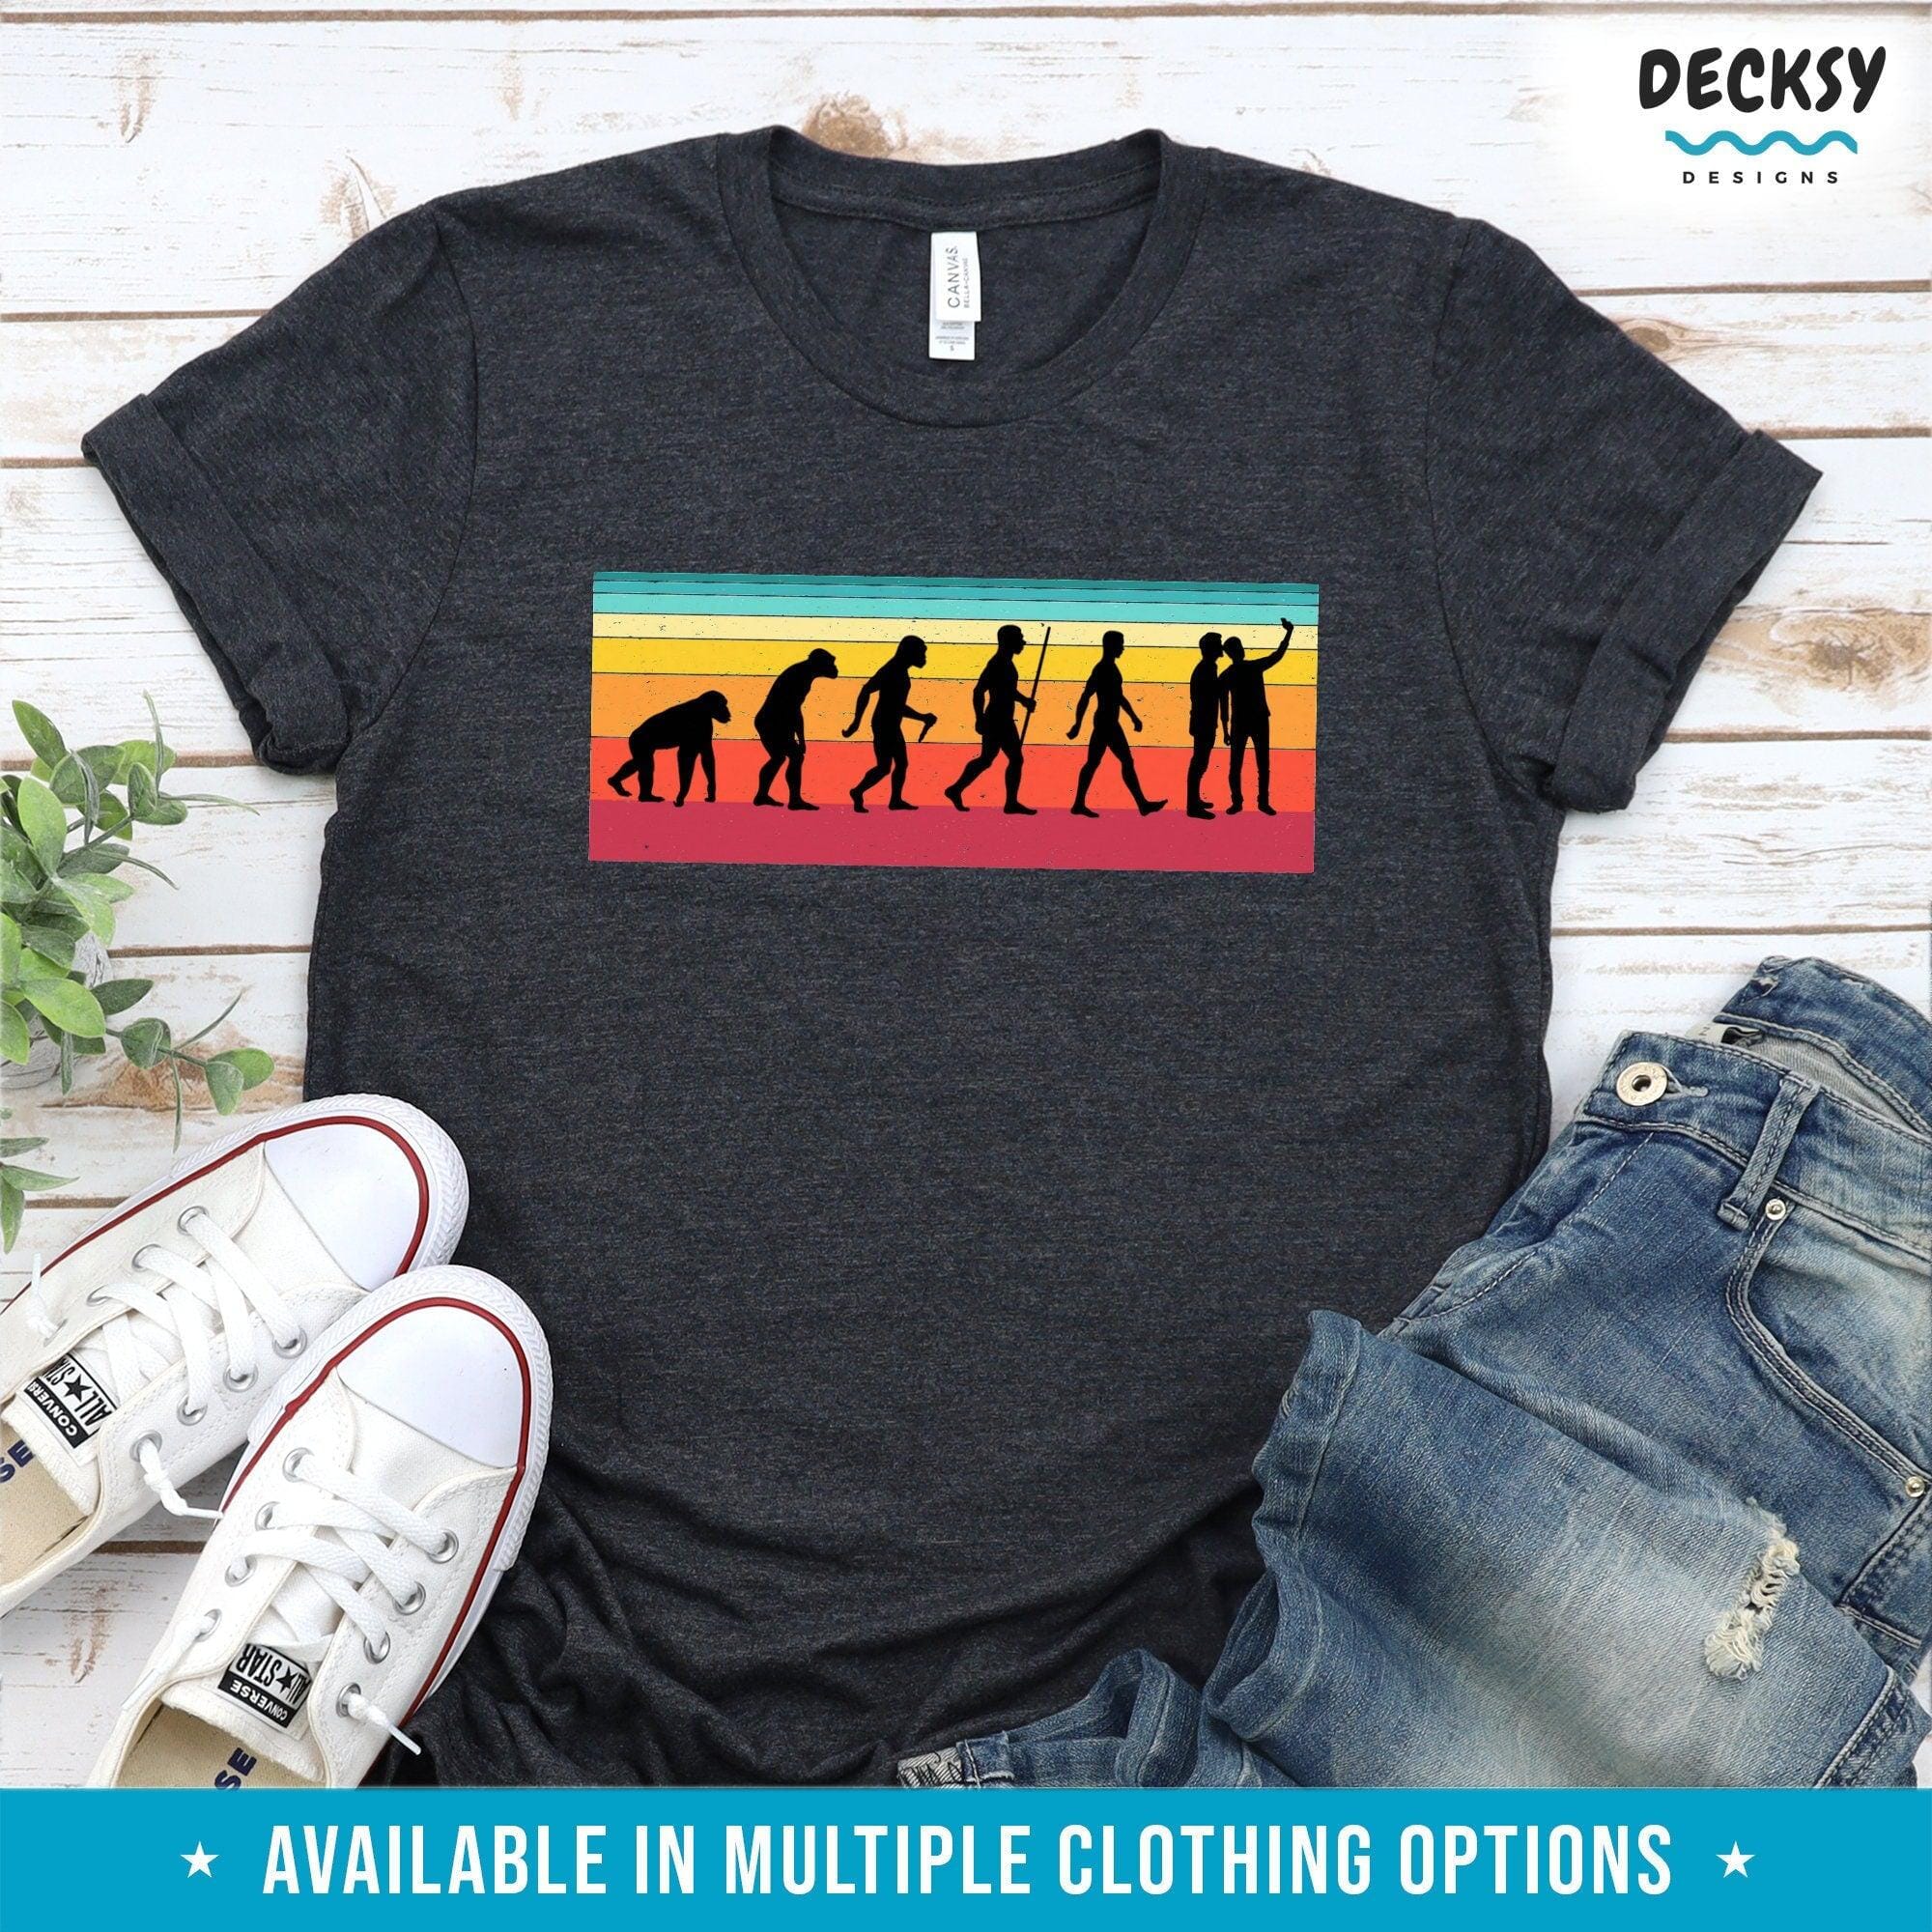 Funny Selfie Tshirt, Evolution Of Man Gift-Clothing:Gender-Neutral Adult Clothing:Tops & Tees:T-shirts:Graphic Tees-DecksyDesigns